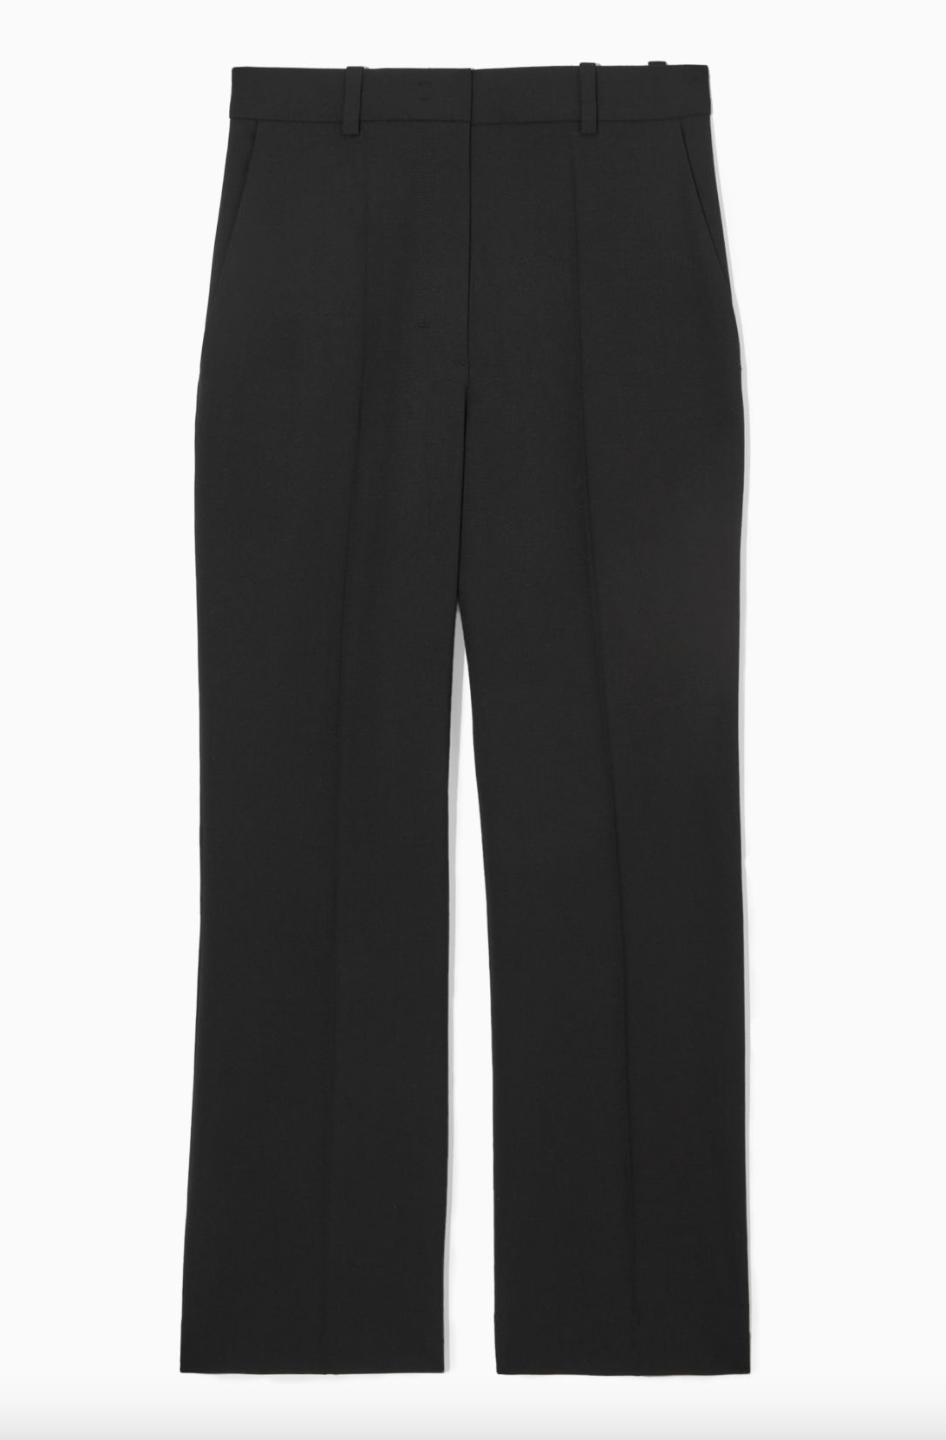 The Best Wool Pants Give You a Reason to Get Out of the House